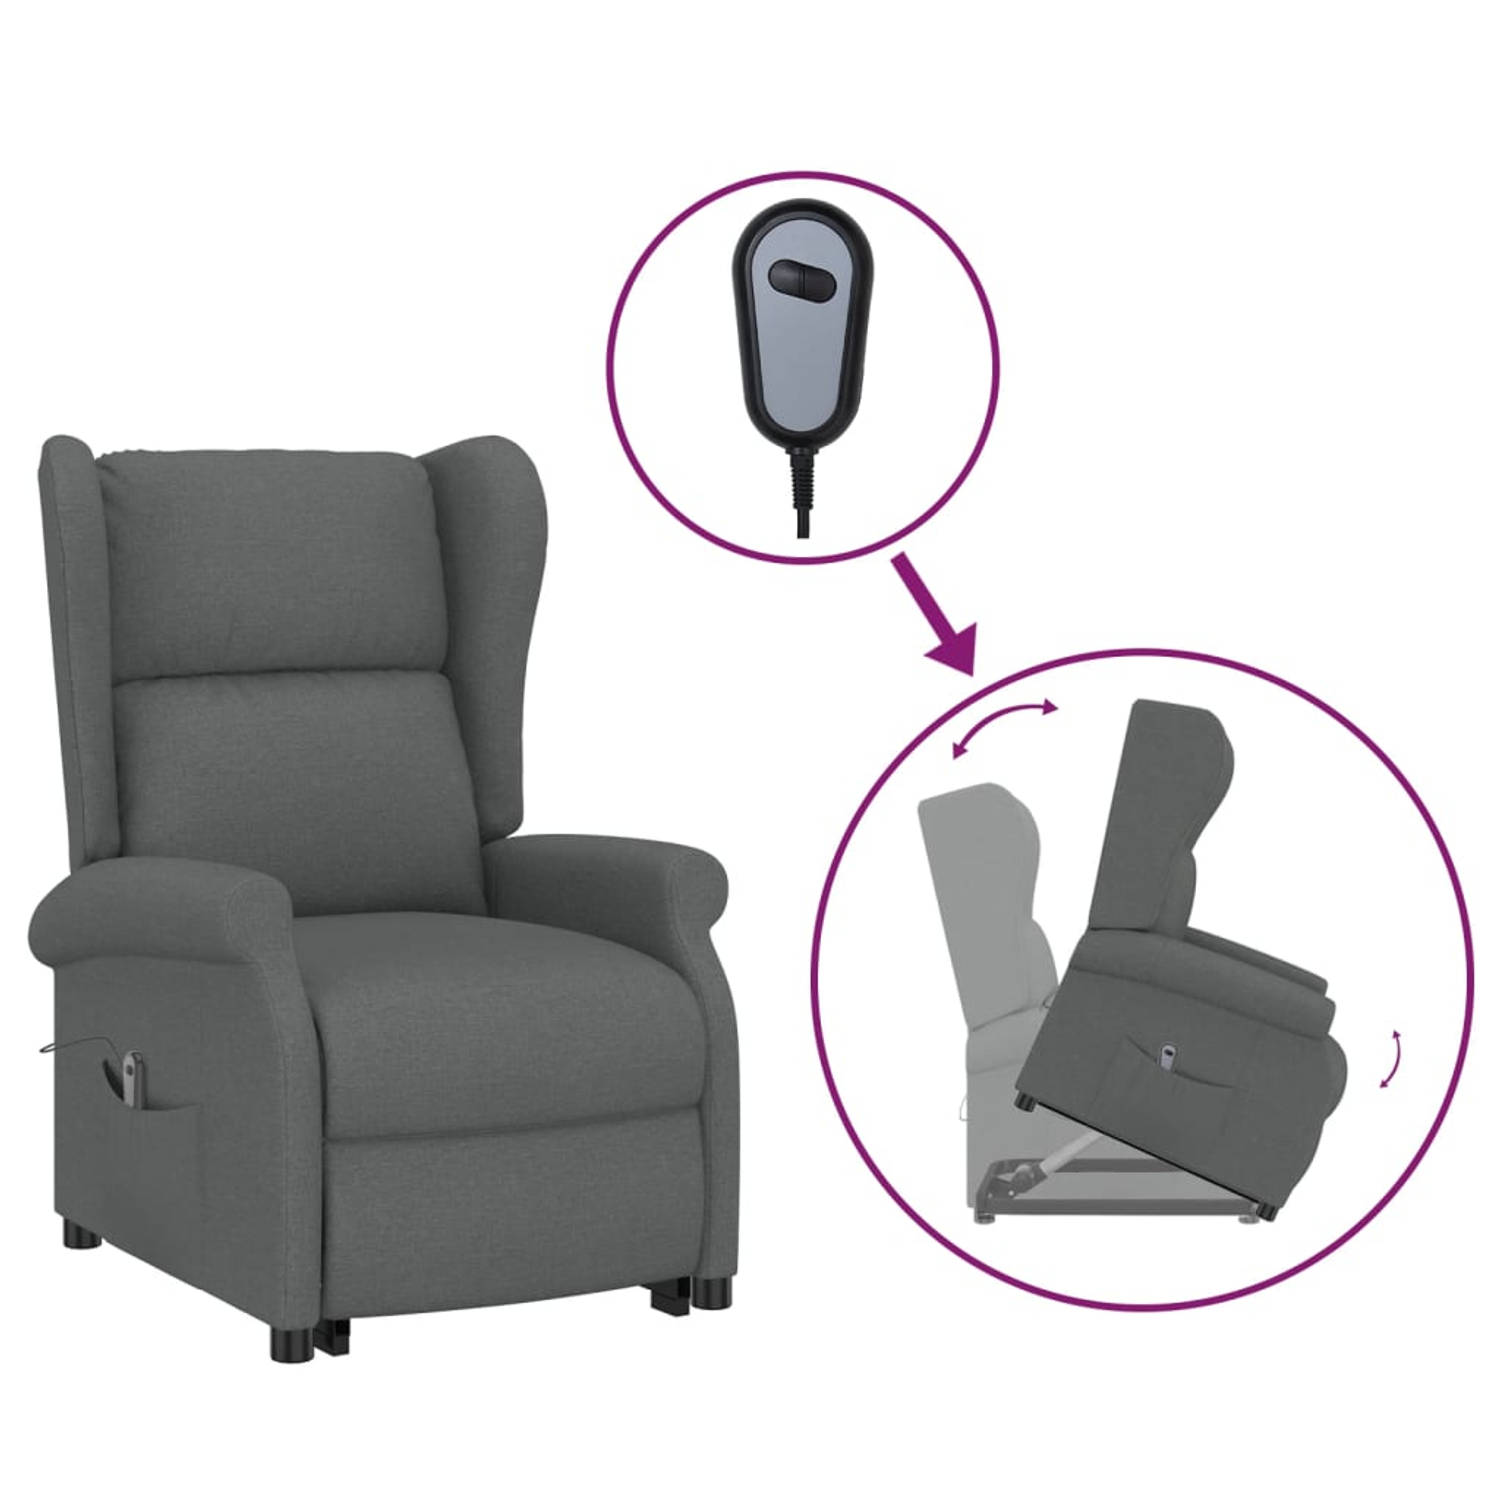 The Living Store Sta-op-stoel stof donkergrijs - Fauteuil